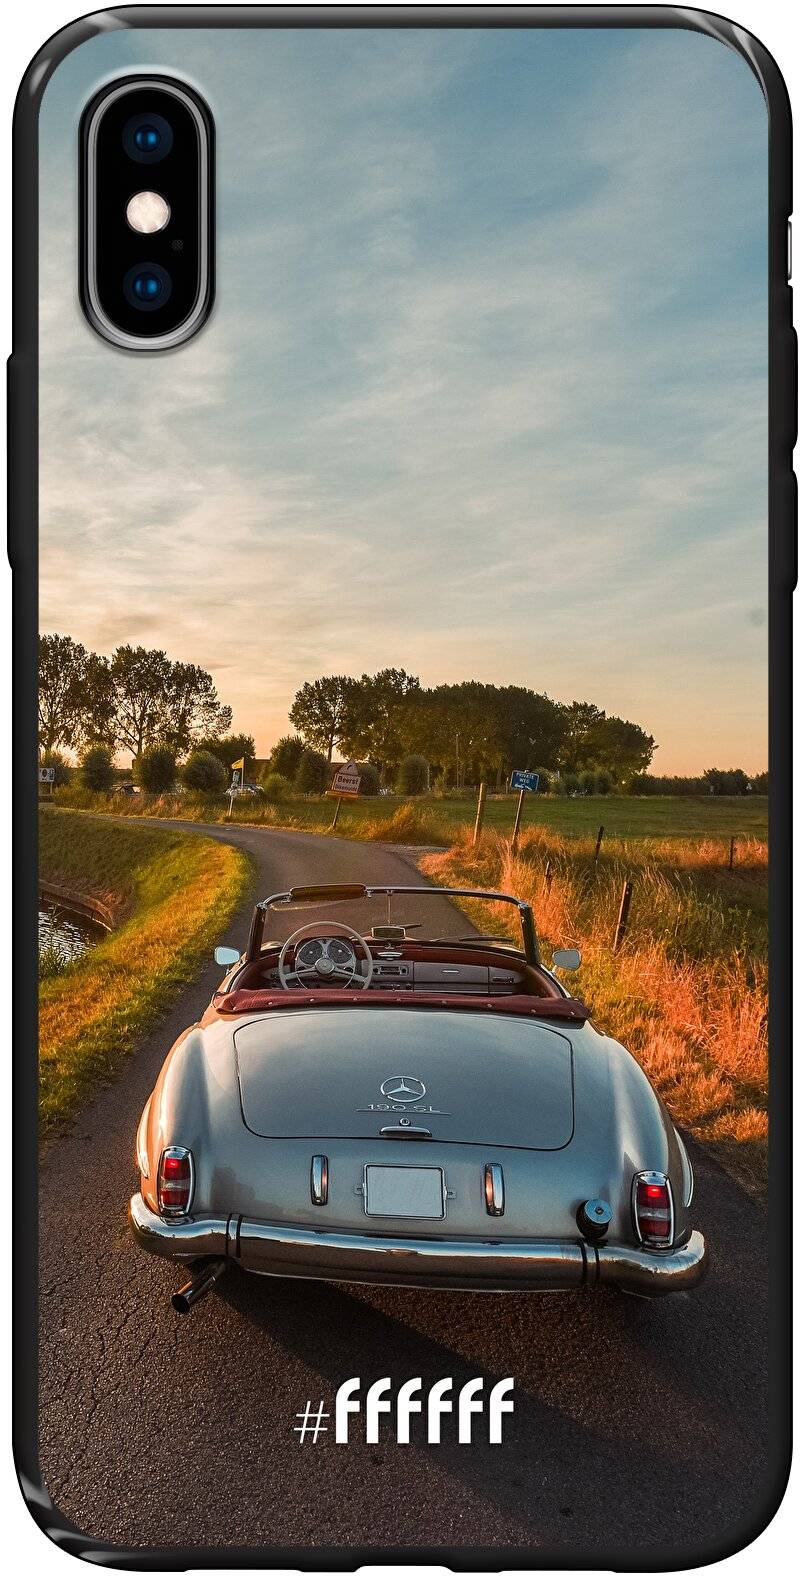 Oldtimer iPhone Xs